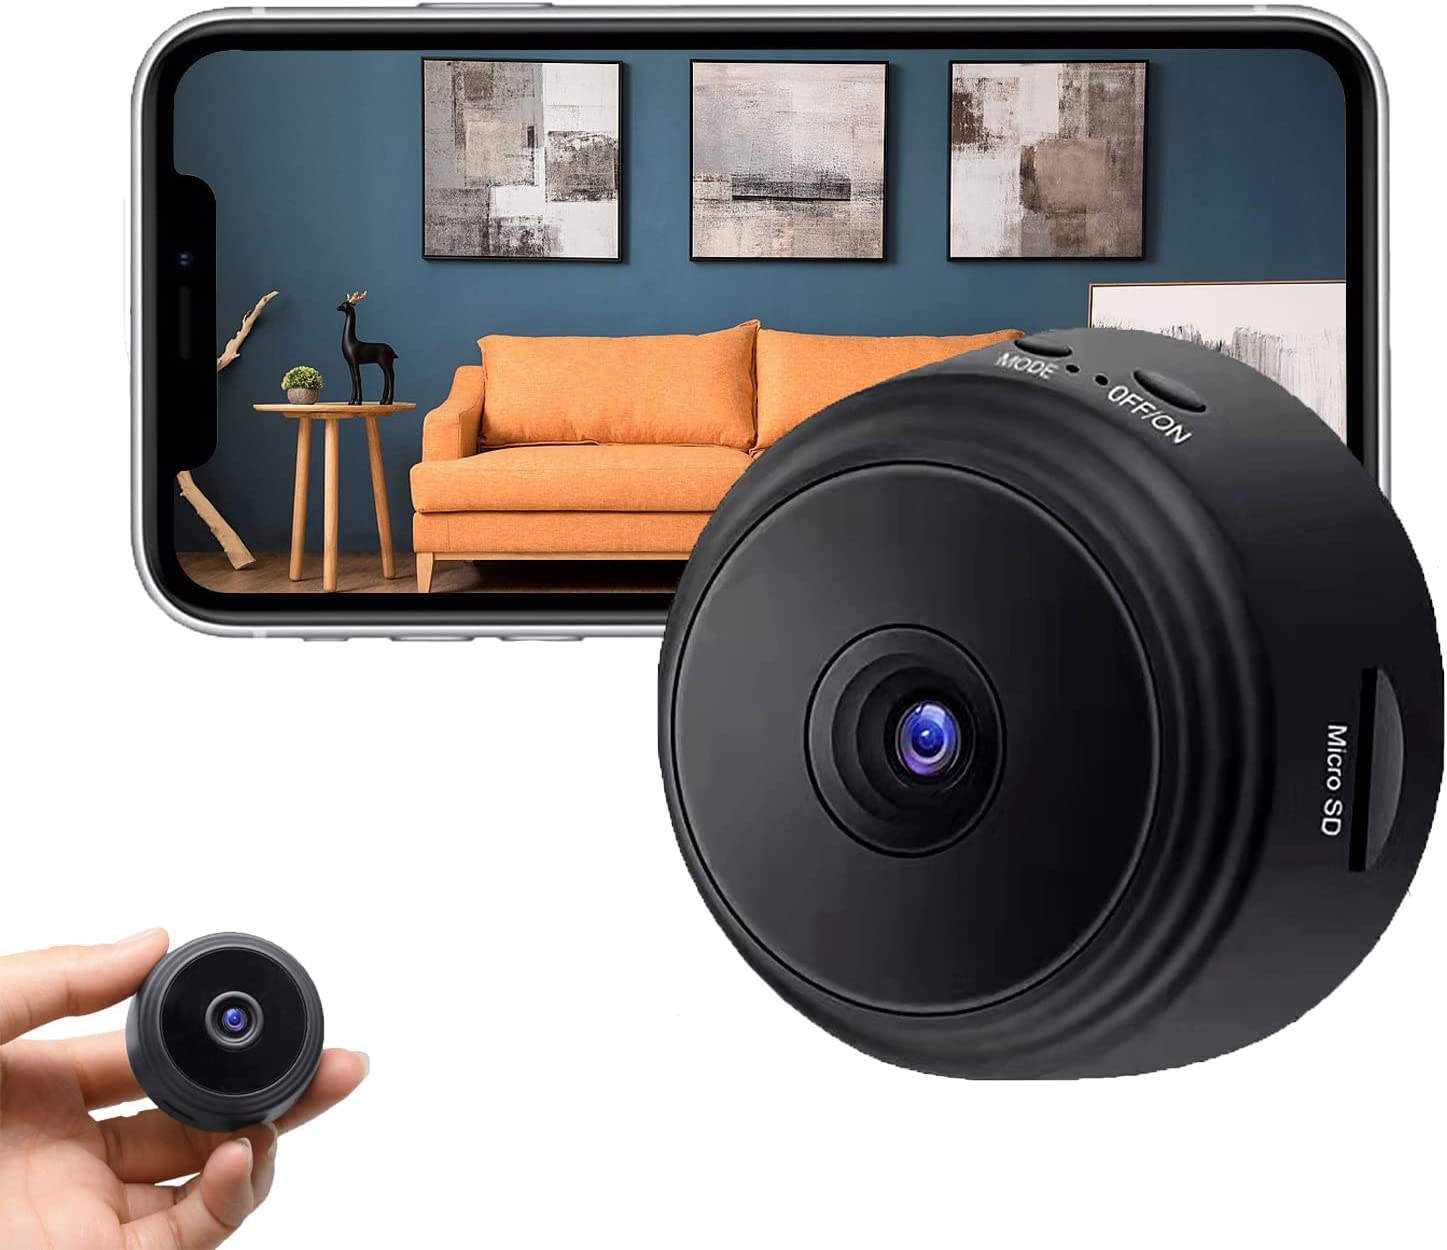 Comfort Valley Spy Camera - 1080P Magnetic WiFi Mini Nanny Cam for Ultimate Home Security and Monitoring